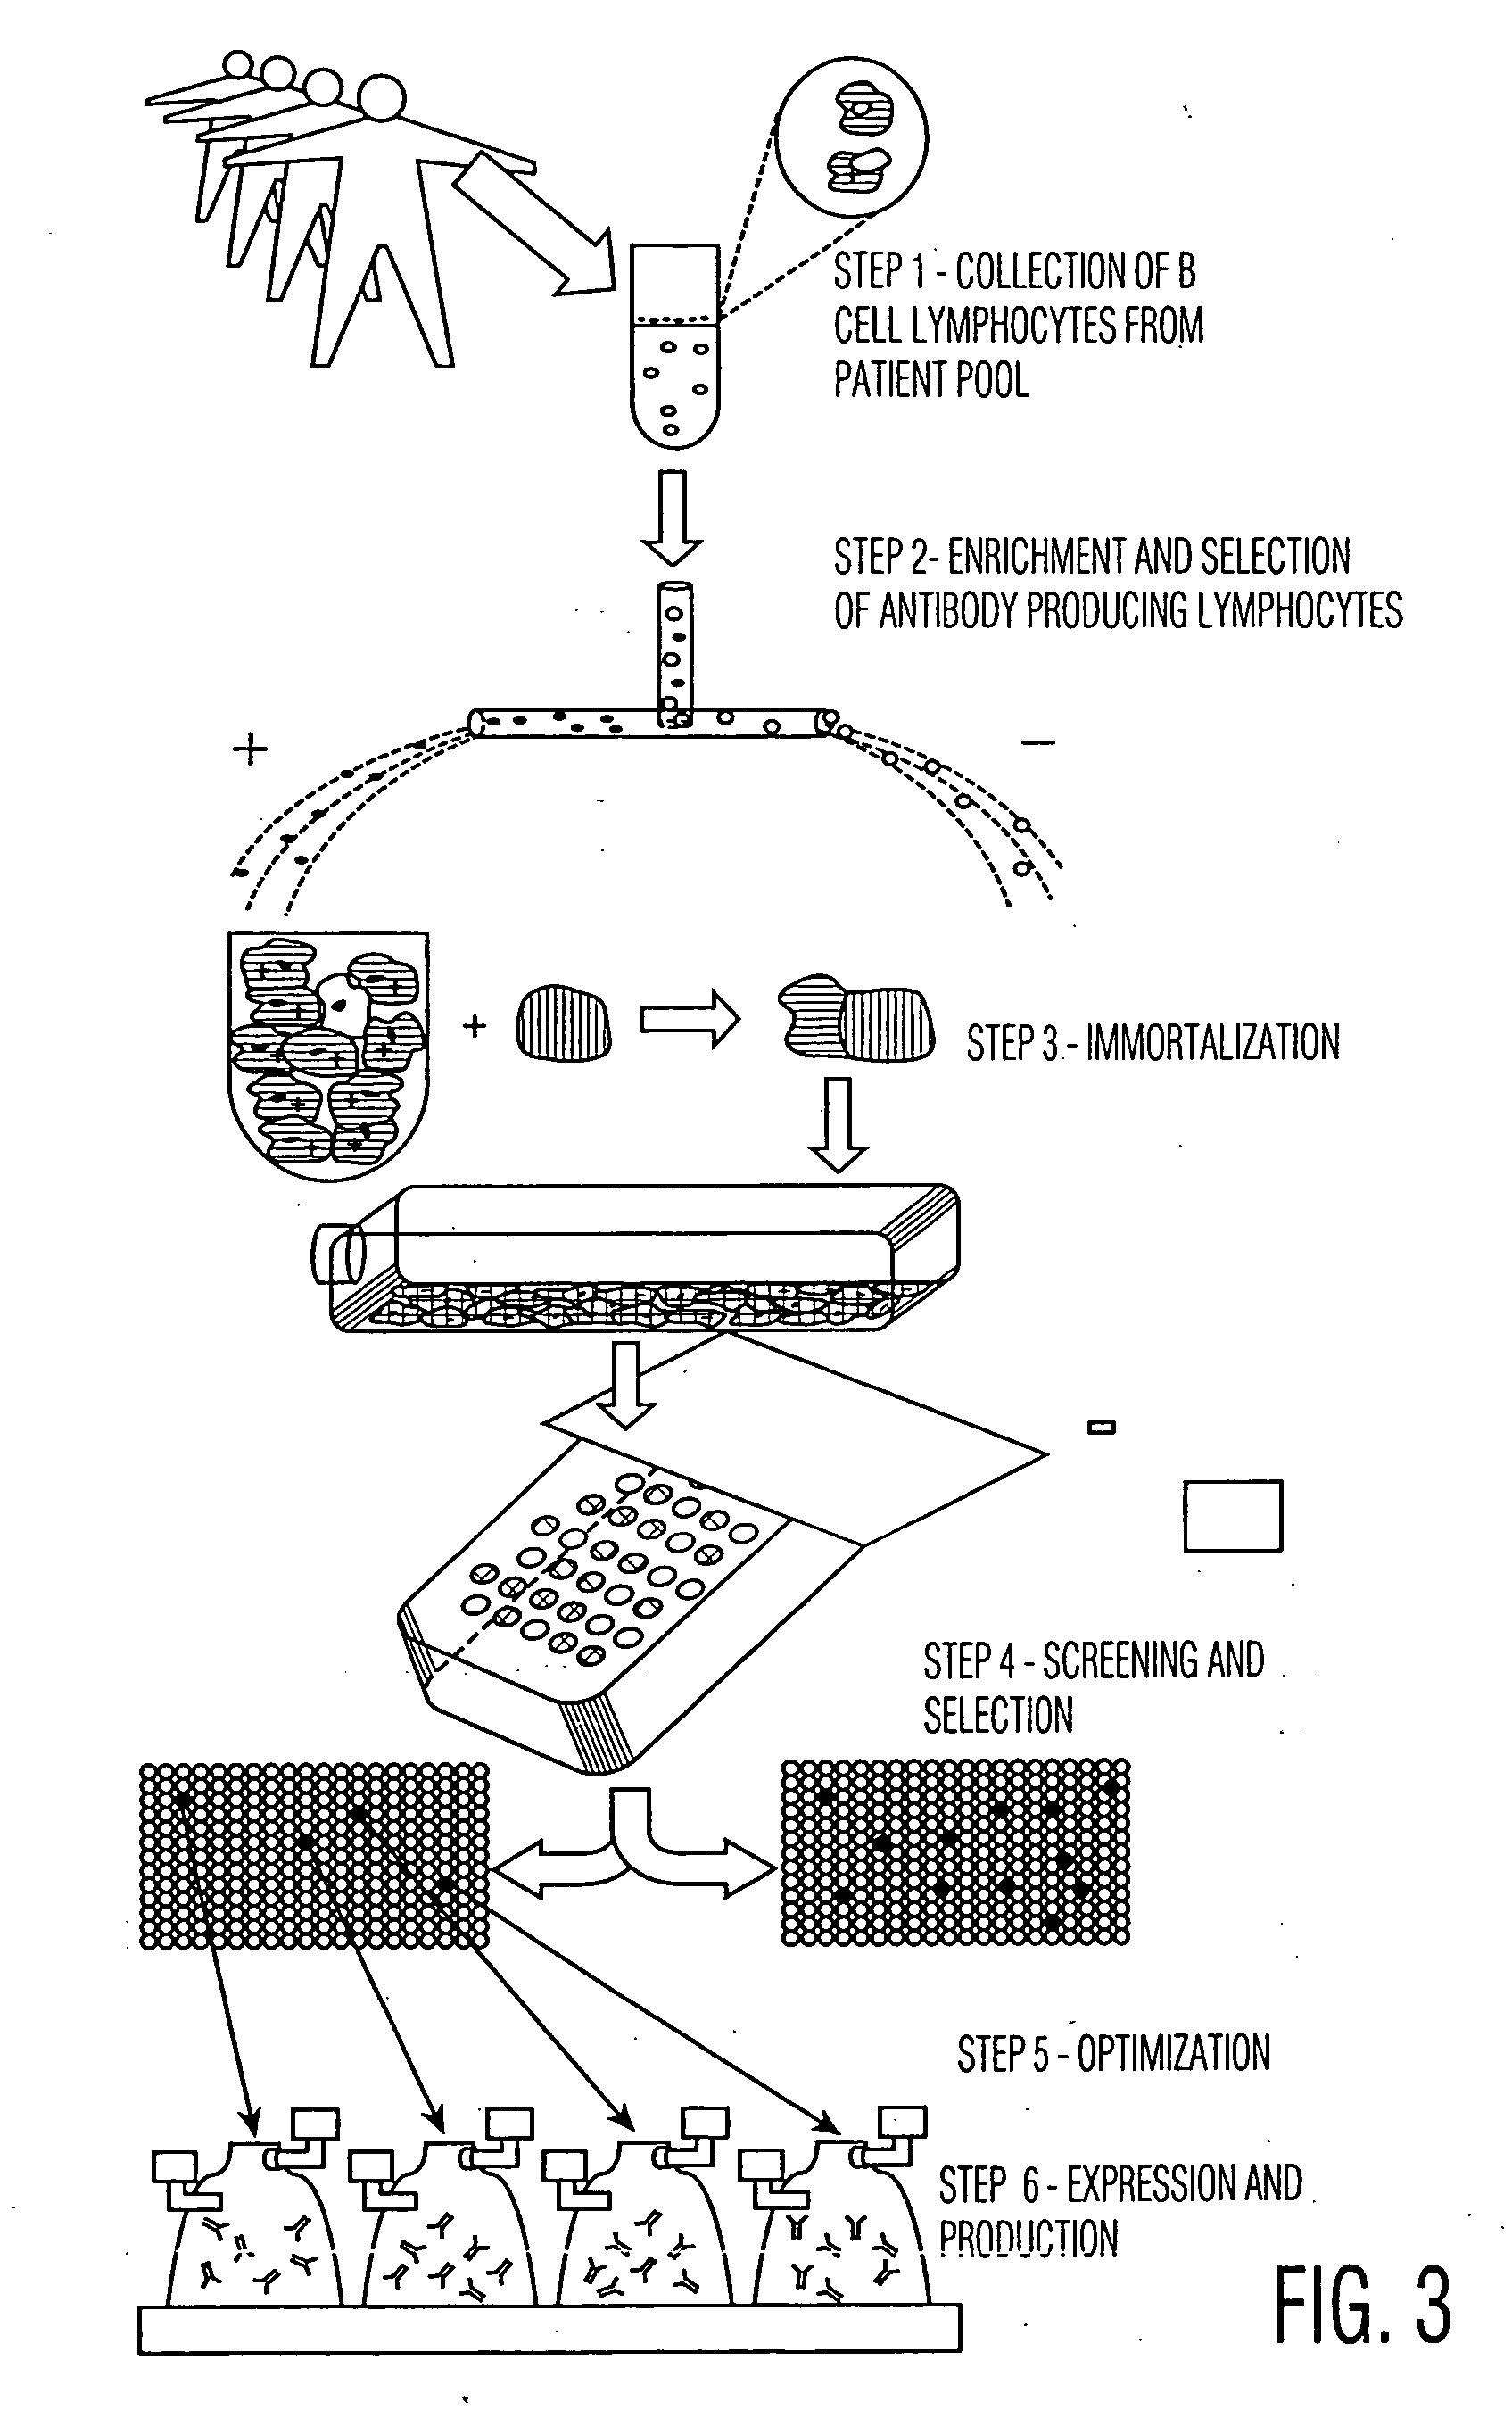 Screening antibodies using an optical fiber array device capable of simultaneously performing multiple functional assays